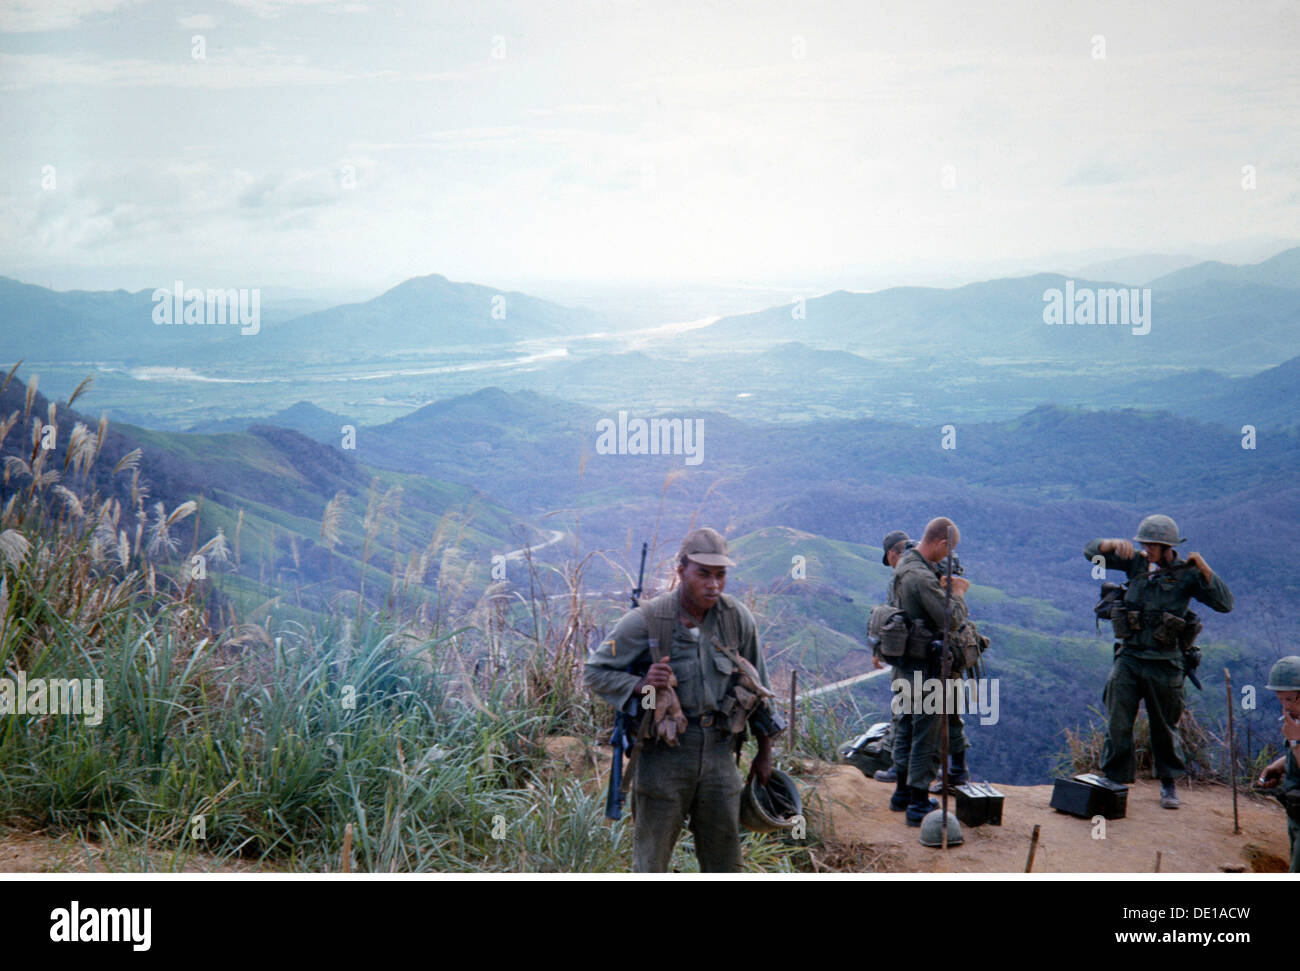 Vietnam War 1957 - 1975, American soldiers in a position on a mountain, South Vietnam, 1965, assignment, mountains, mounts, landscape, landscapes, military, armed forces, army, armies, USA, United States of America, South-East Asia, South East Asia, Southeast Asia, Far East, Viet Nam conflict, Viet Nam, Vietnam, war, wars, conflict, conflicts, 1960s, 60s, 20th century, people, group, groups, men, man, male, soldiers, soldier, mount, mountain, peak, peaks, historic, historical, Additional-Rights-Clearences-Not Available Stock Photo